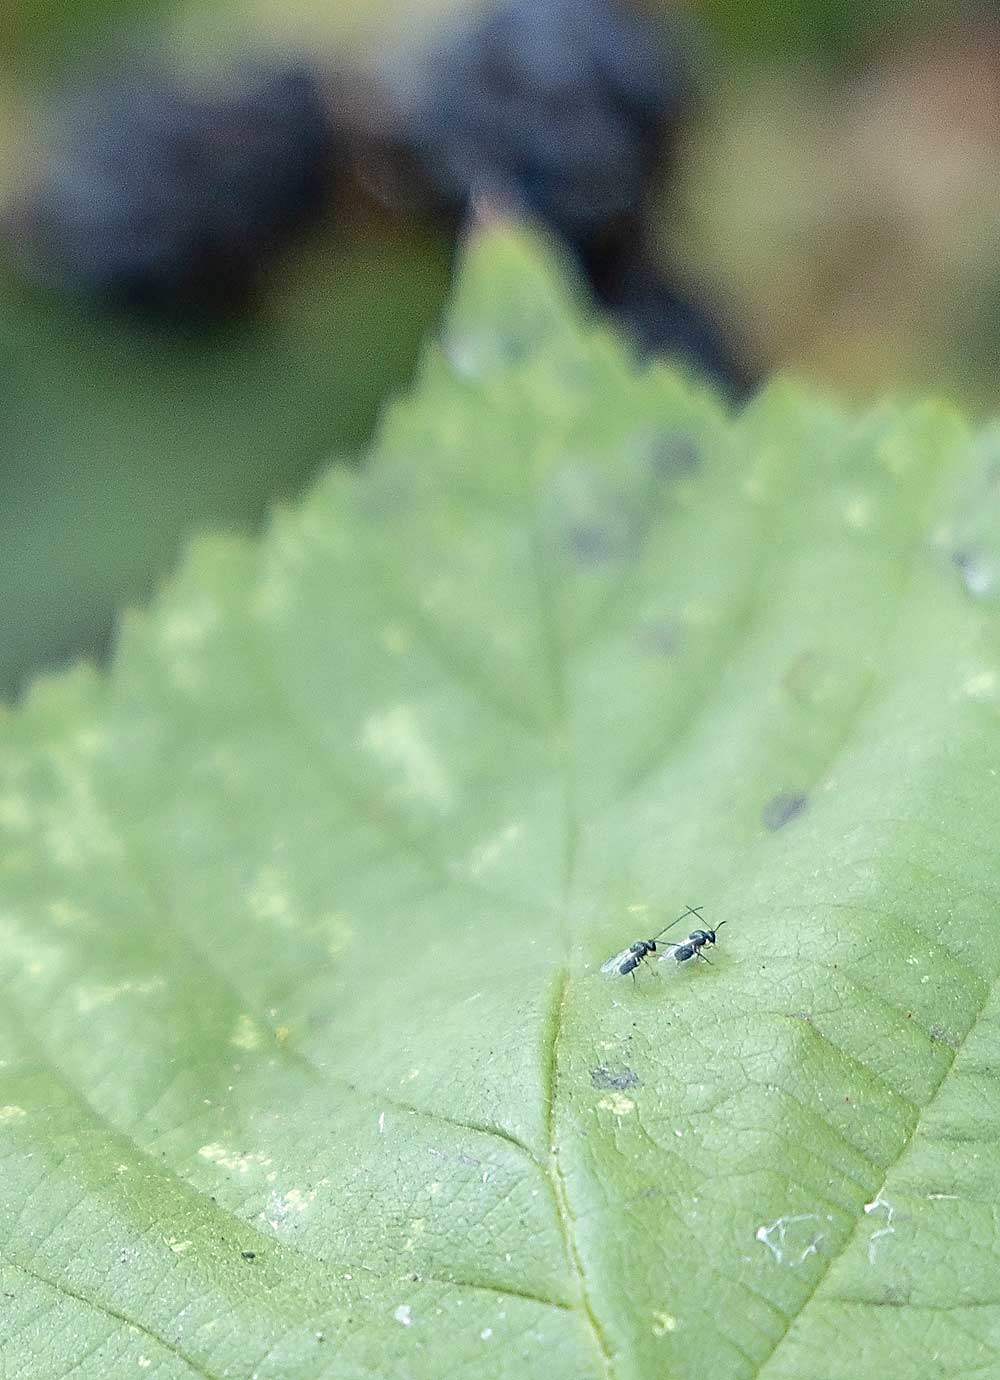 Spotted wing drosophila are small, but the wasps that parasitize their larvae are even smaller. Two freshly released Ganaspis wasps sit on a Himalayan blackberry leaf along the border of a blueberry farm. (Kate Prengaman/Good Fruit Grower)